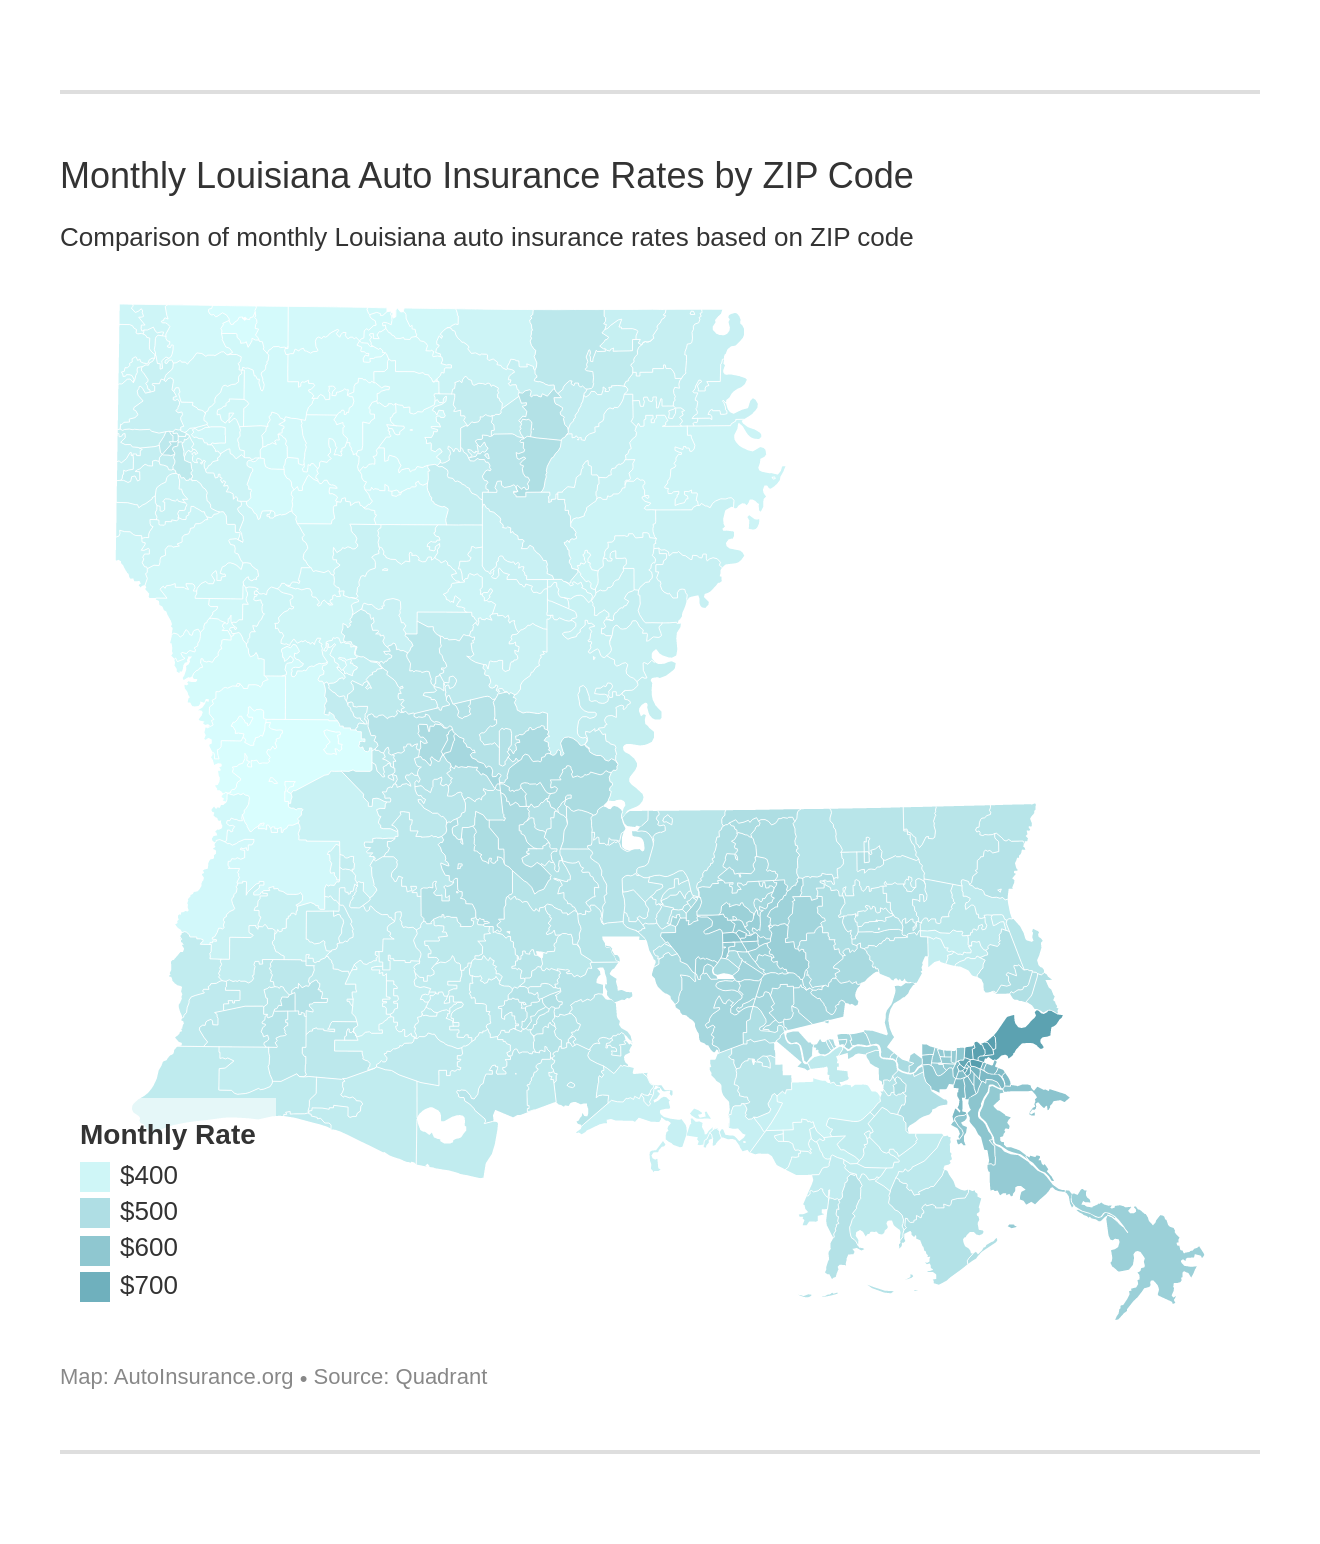 Monthly Louisiana Auto Insurance Rates by ZIP Code